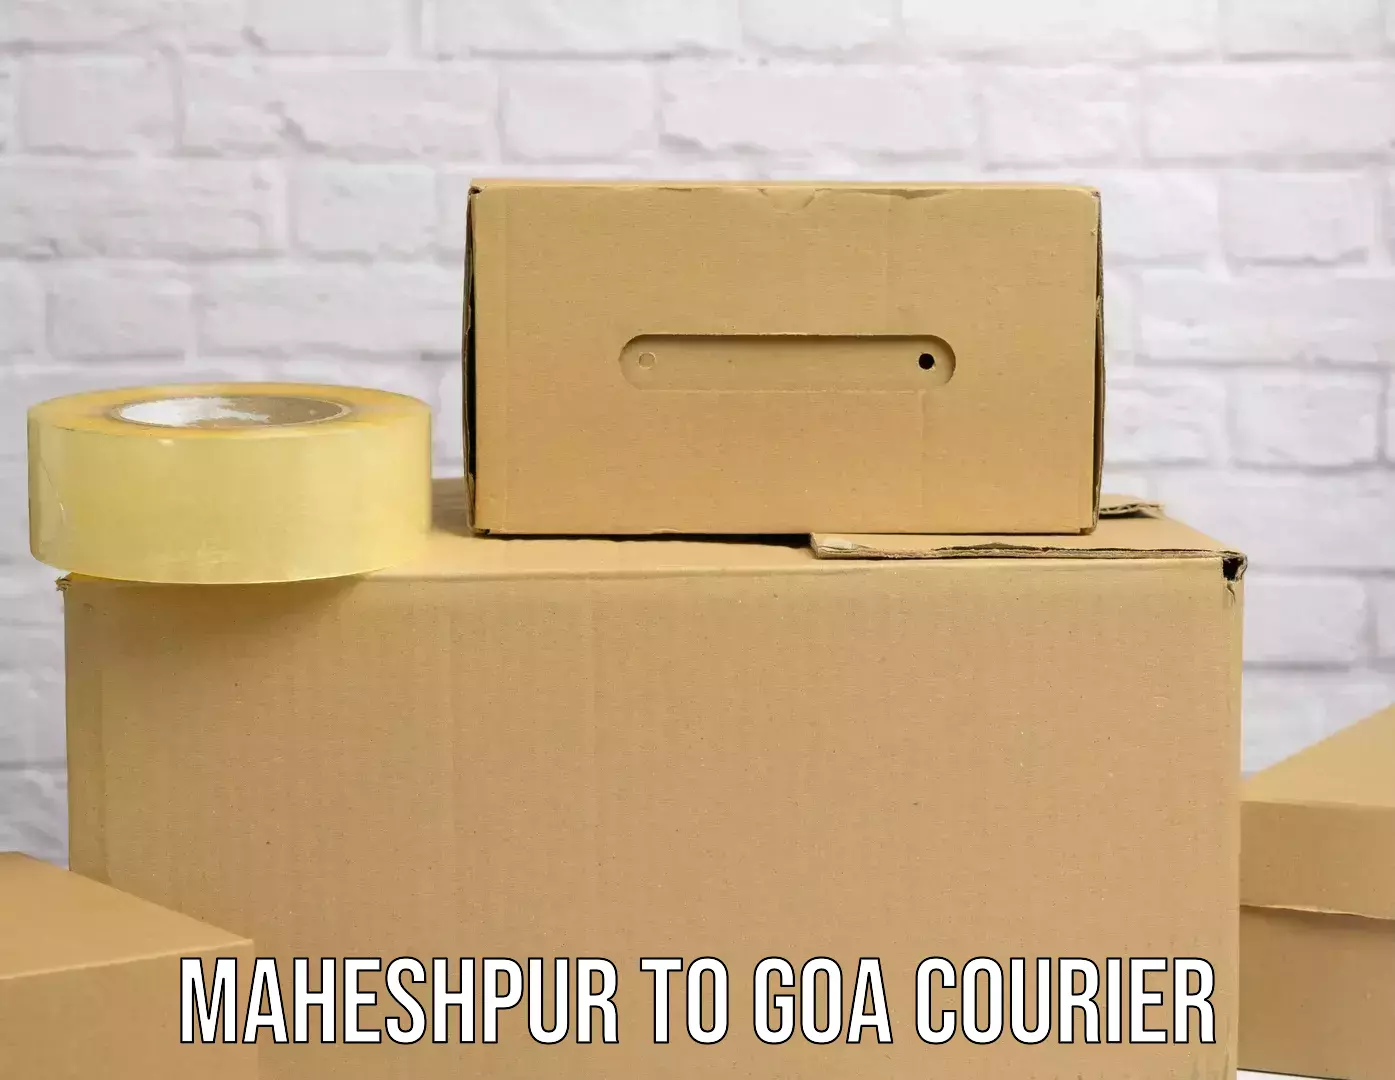 State-of-the-art courier technology Maheshpur to Ponda